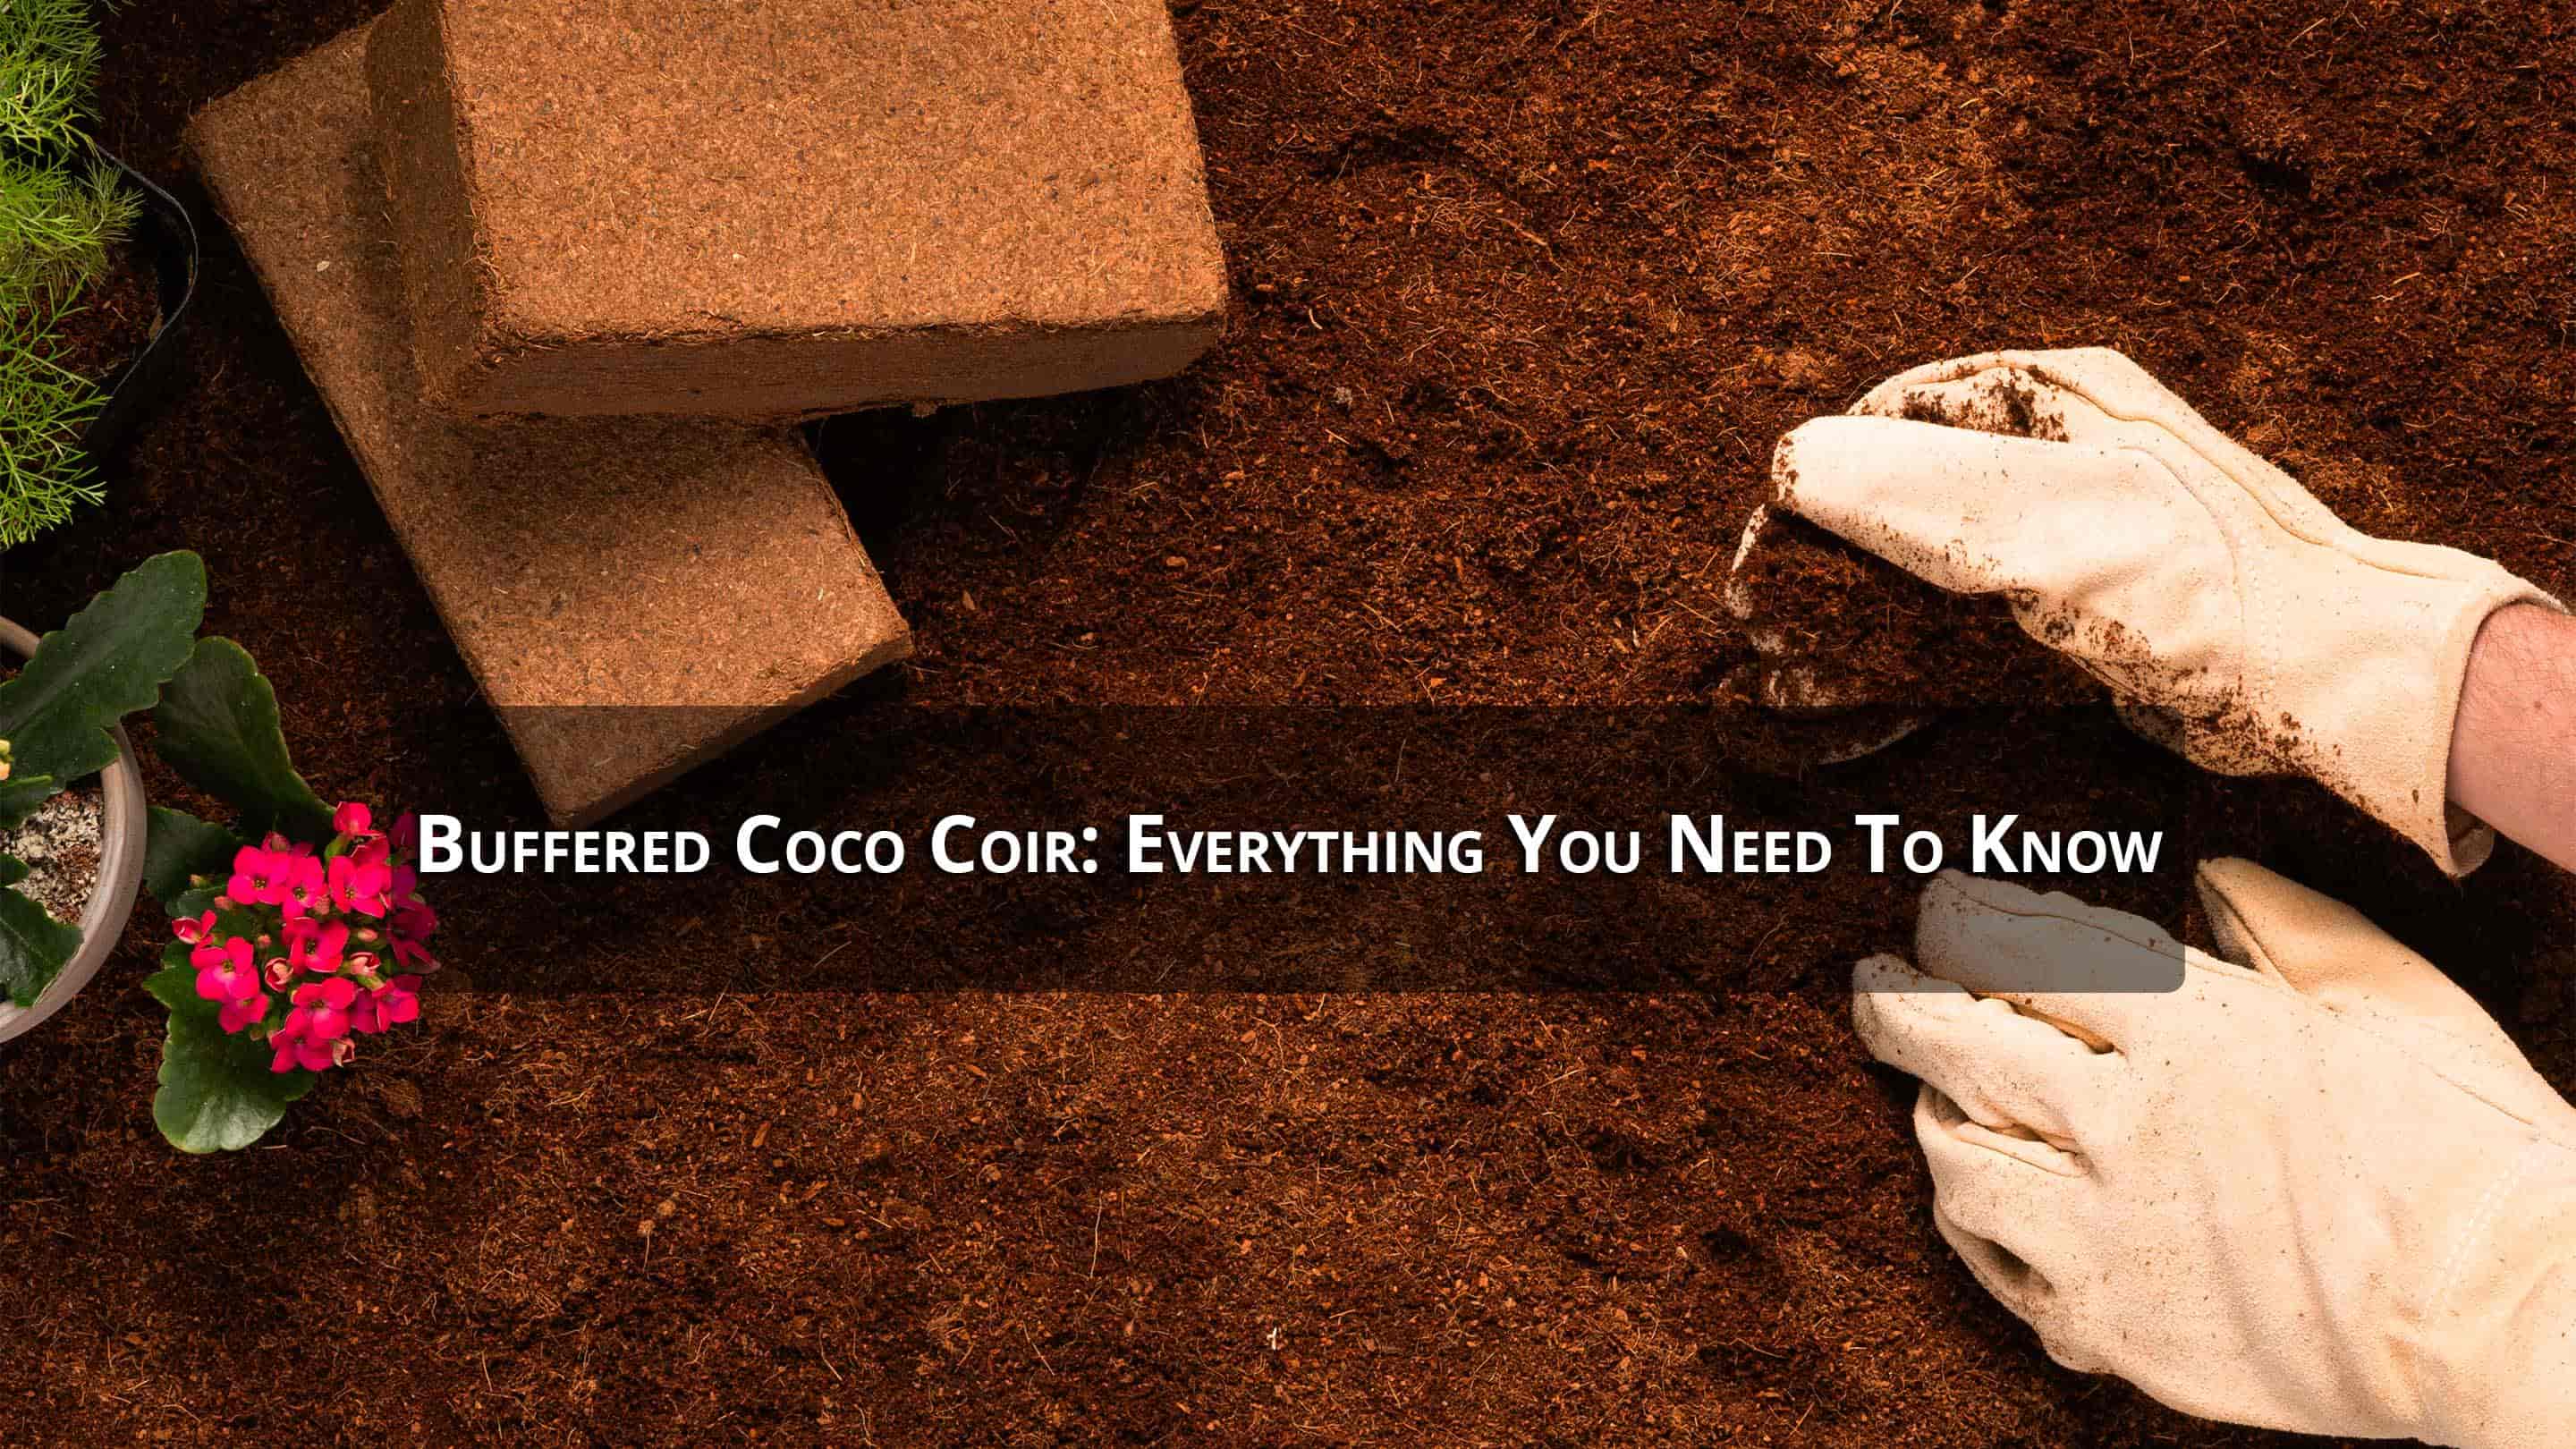 Benefits Of Coco Coir: Advantages of Coco Coir for Gardening